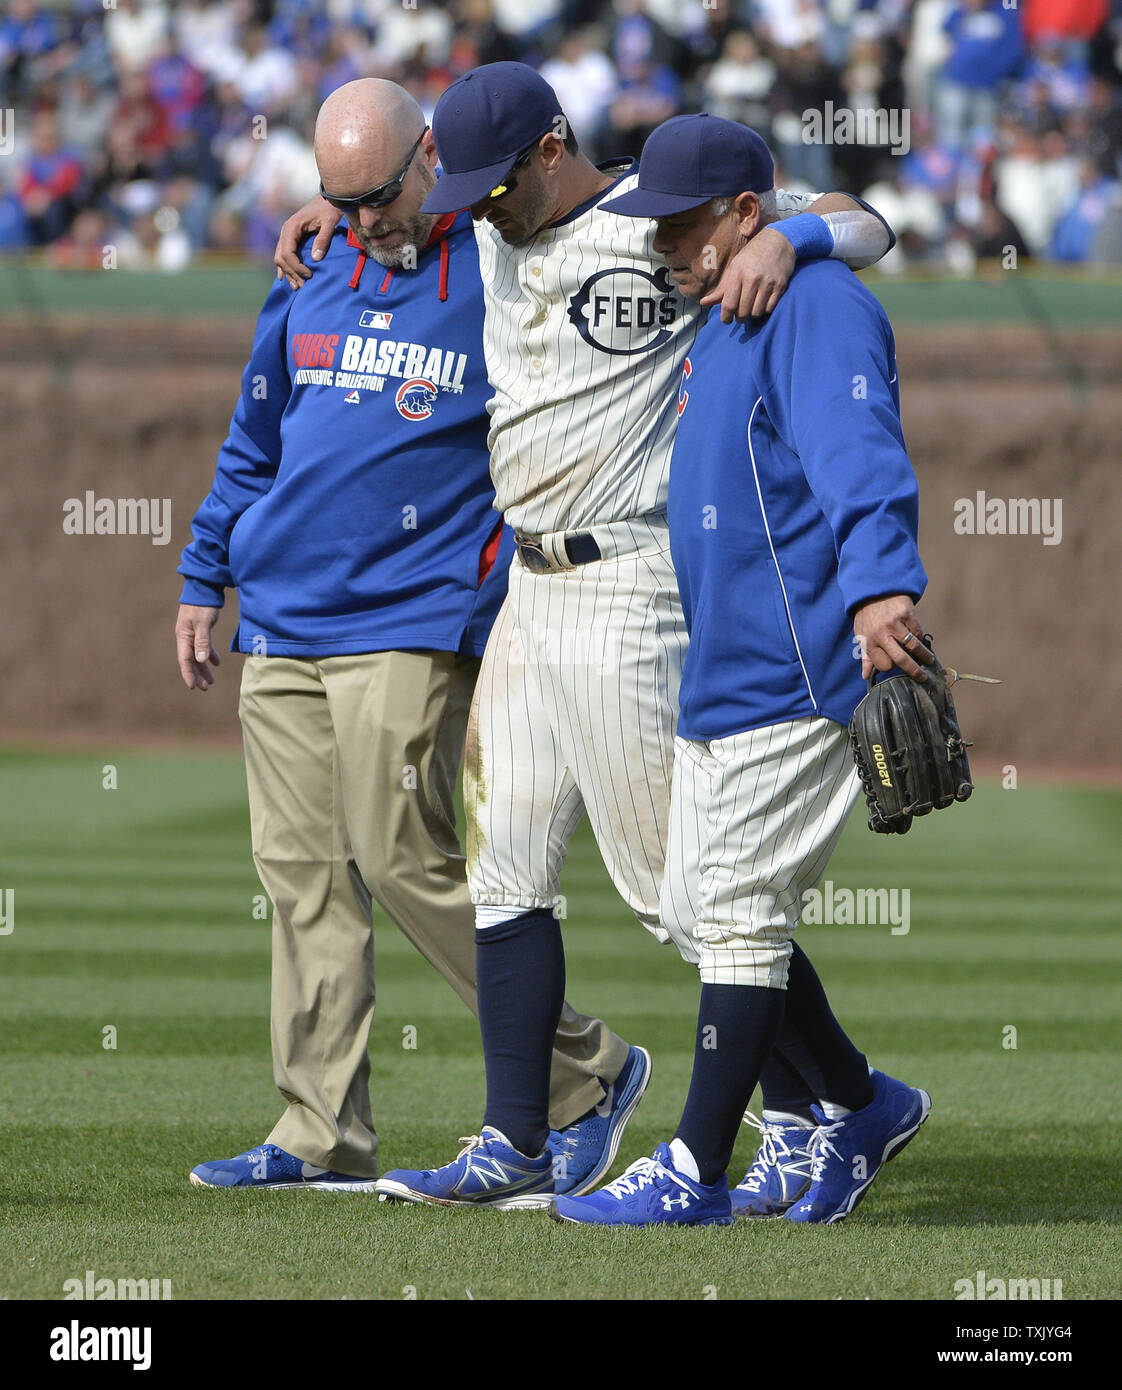 Chicago Cubs manager Rick Renteria (R) and a trainer help left fielder Justin Ruggiano off the field after he injured himself while trying to make a catch during the ninth inning of the Wrigley Field 100th anniversary game against the Arizona Diamondbacks at Wrigley Field on April 23, 2014 in Chicago. The Cubs wore the uniforms of the Chicago Federals, the original team to play in Wrigley Field, while the Diamondbacks donned the uniforms of the Kansas City Packers of the Federal League, a third professional baseball league that competed with the American and National Leagues and folded in 1915 Stock Photo